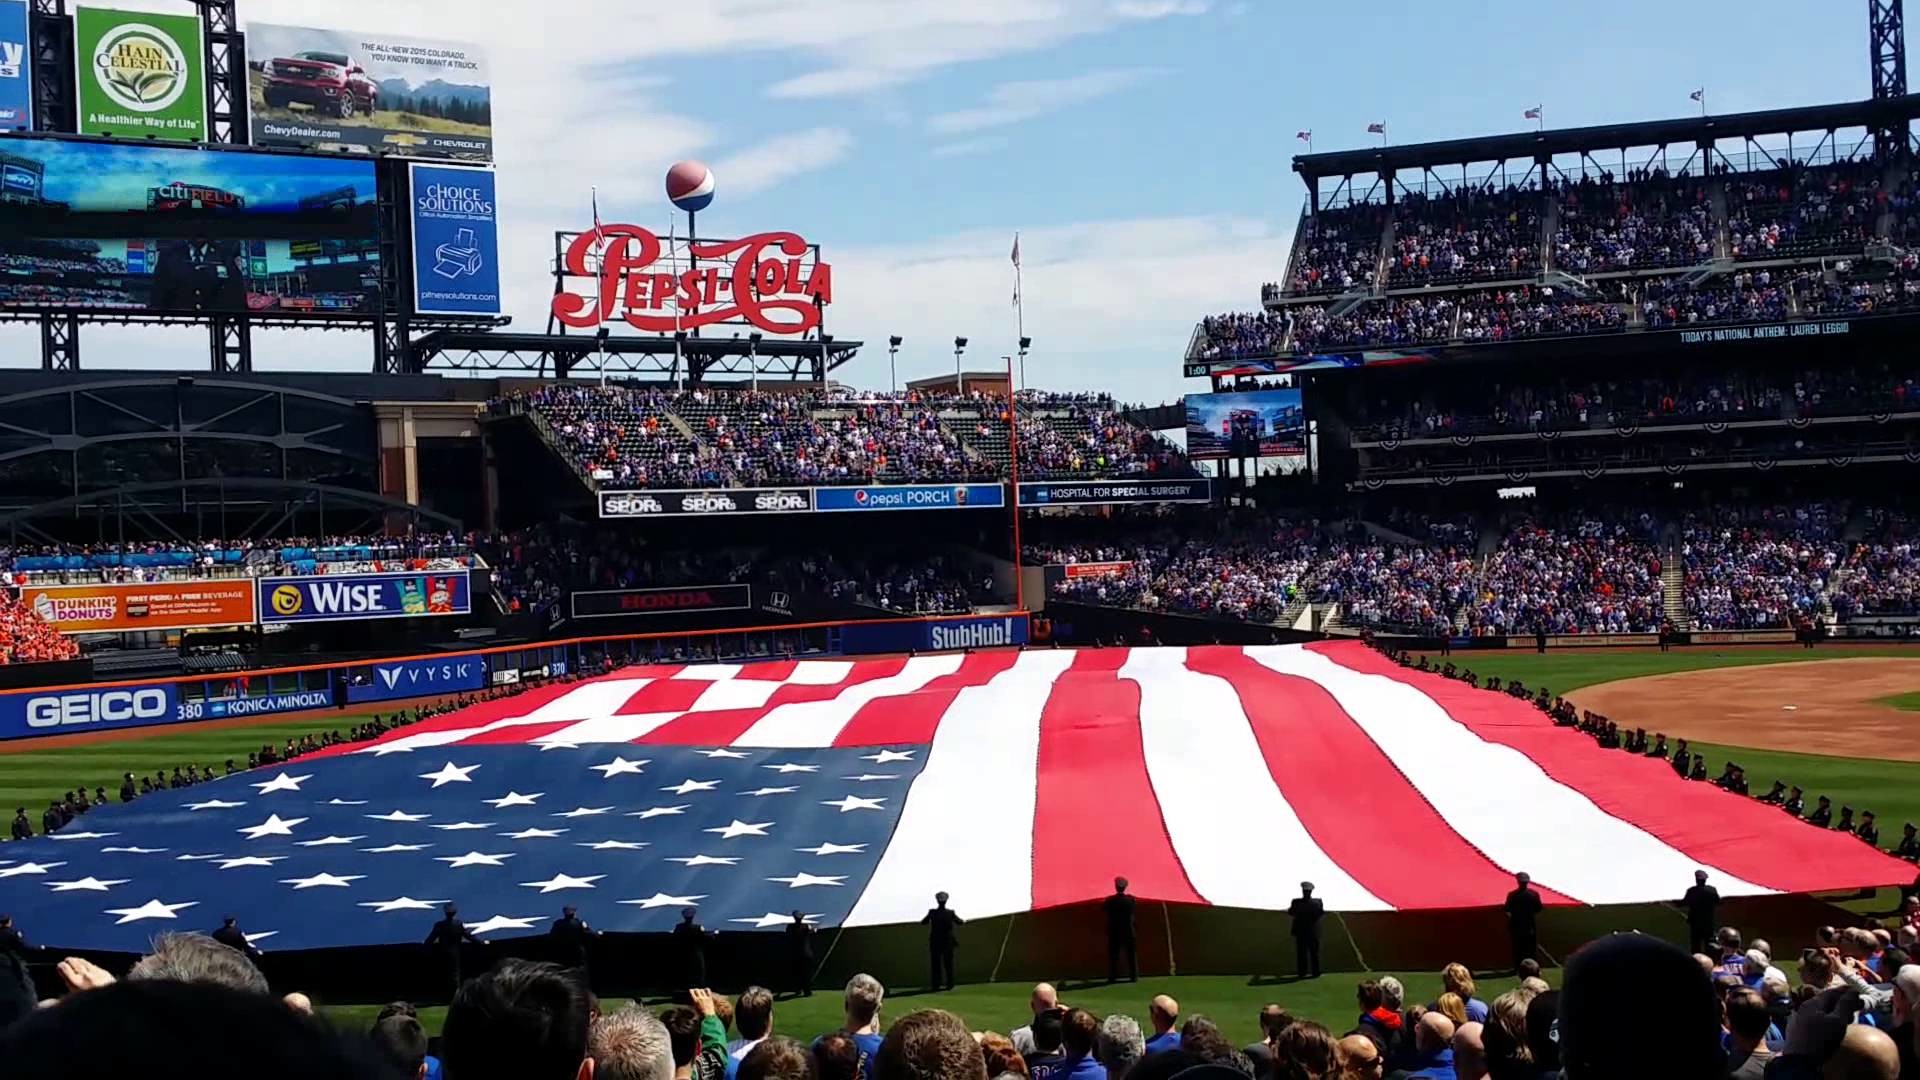 New York Mets 2015 opening day ceremony